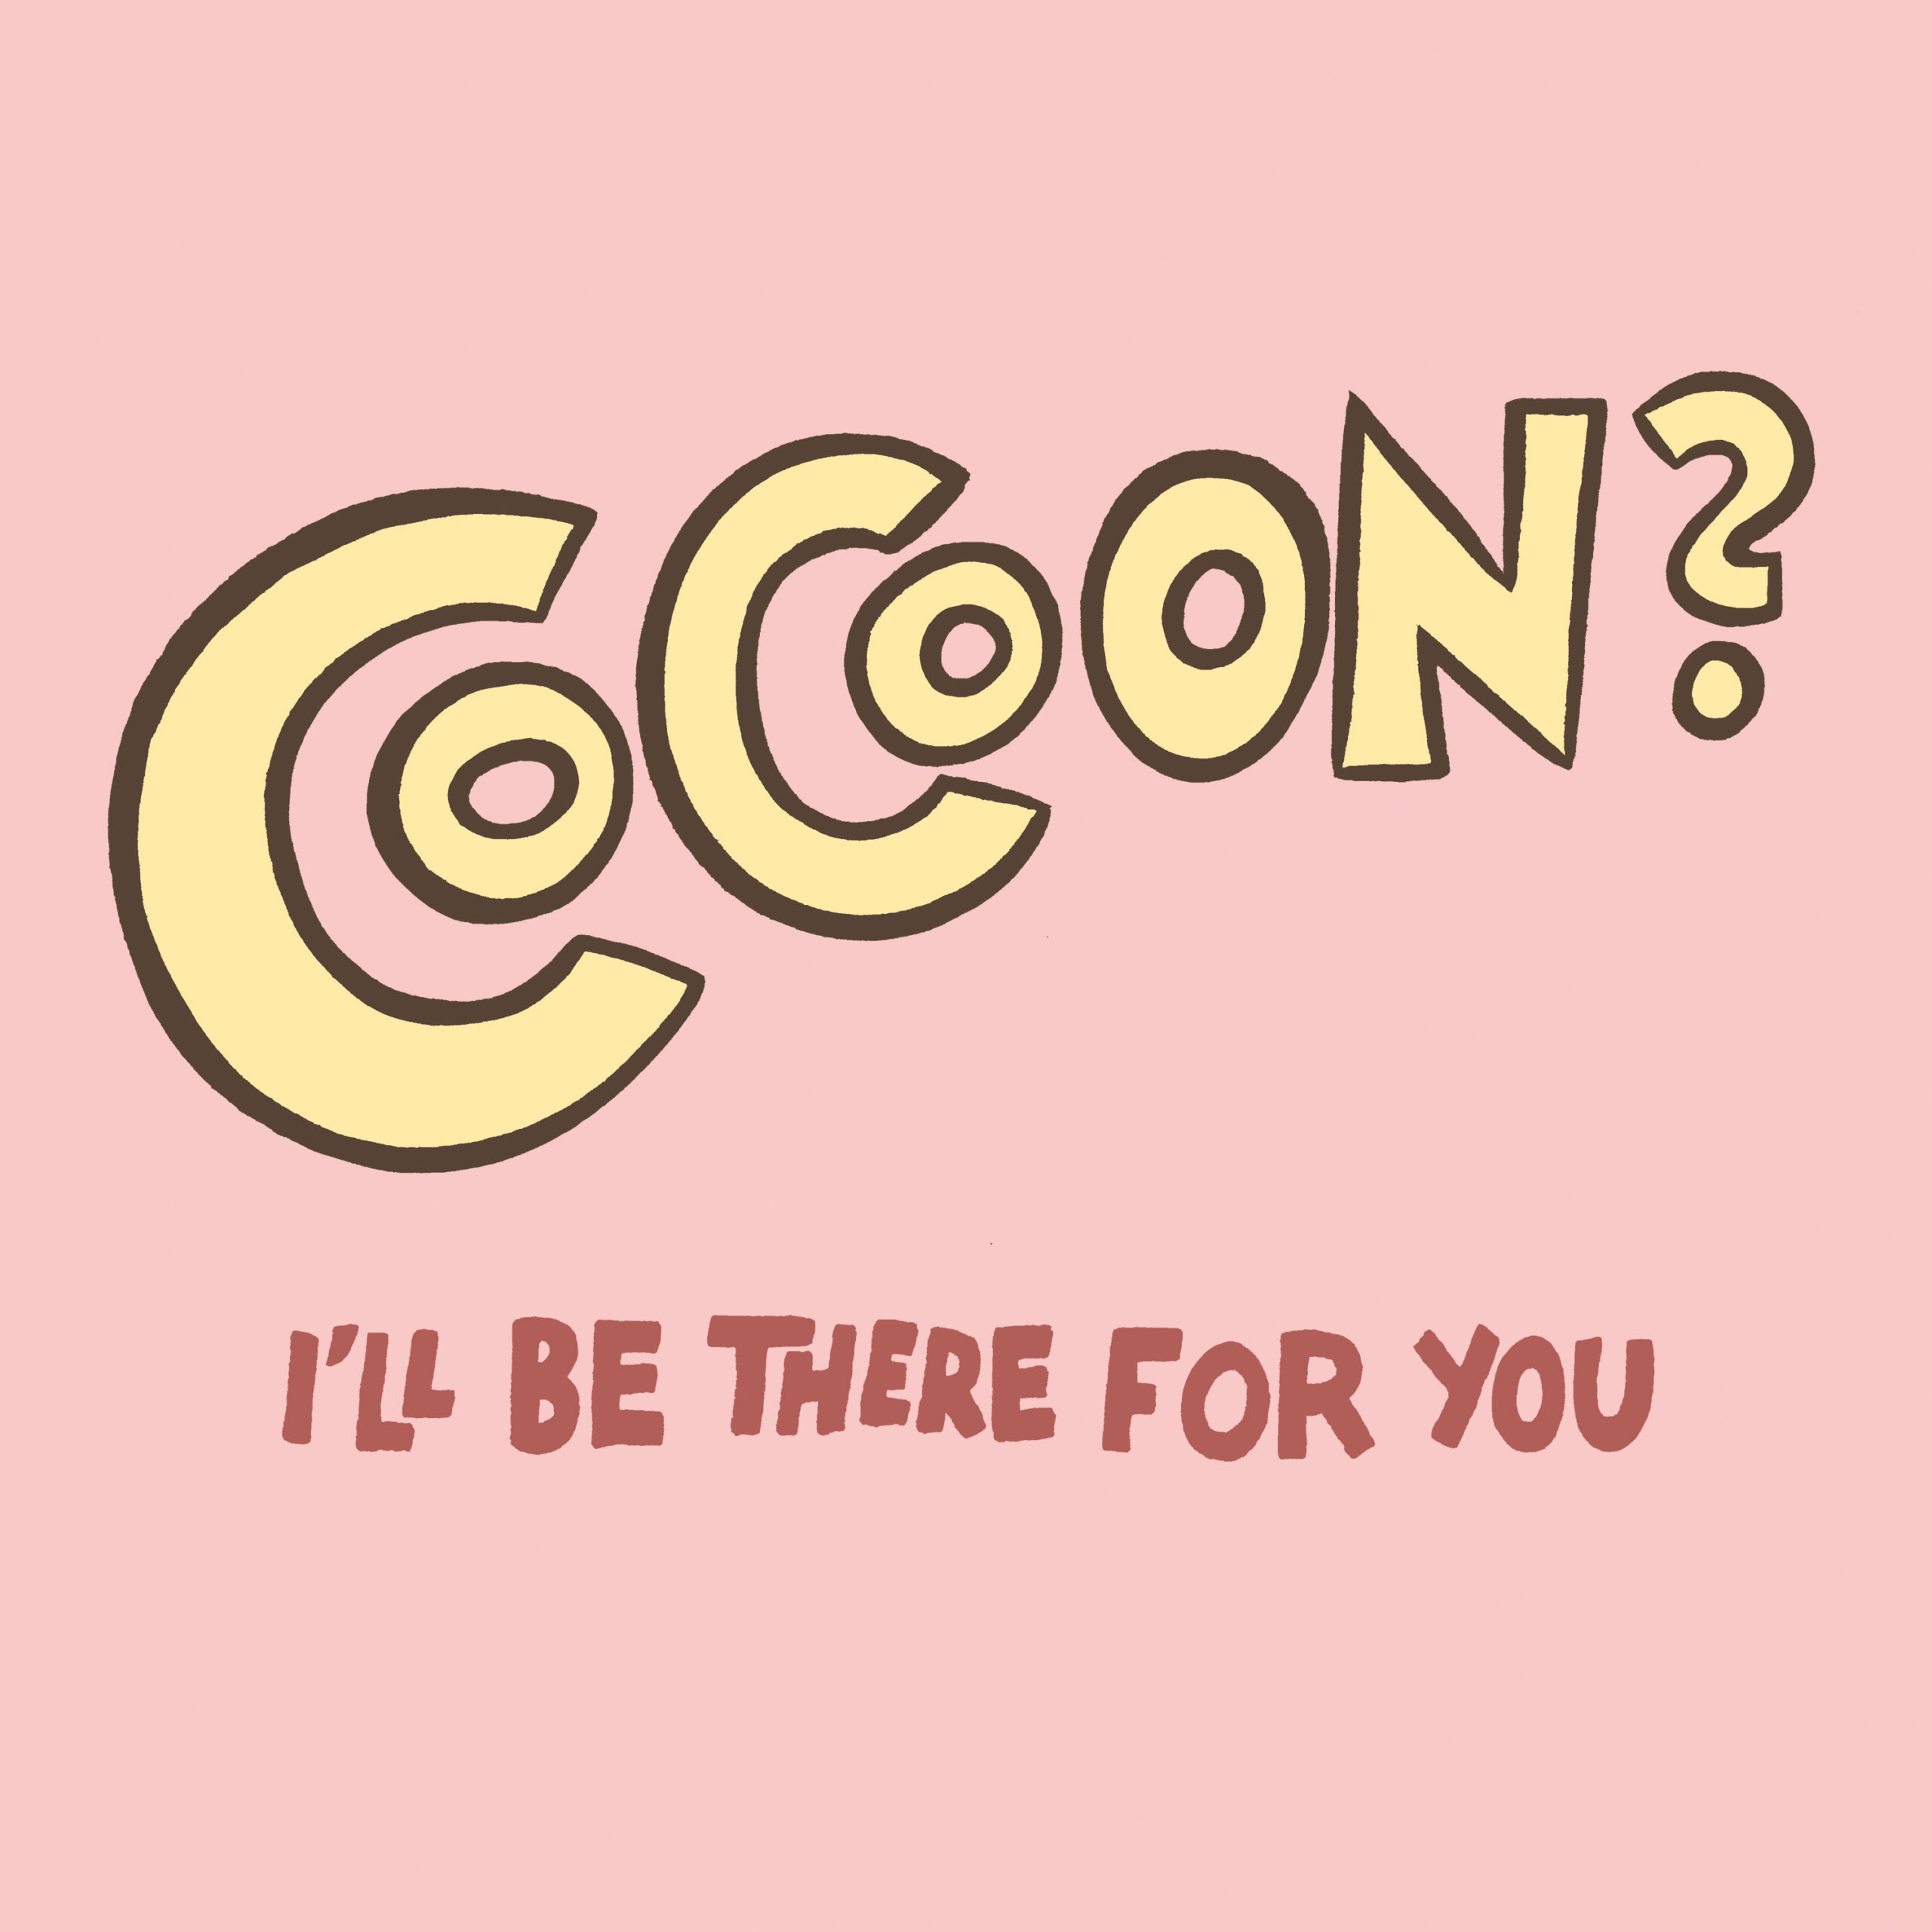 Yum Yum Records - Cocoon – ‘I’ll be there for you’ (The Rembrandts)